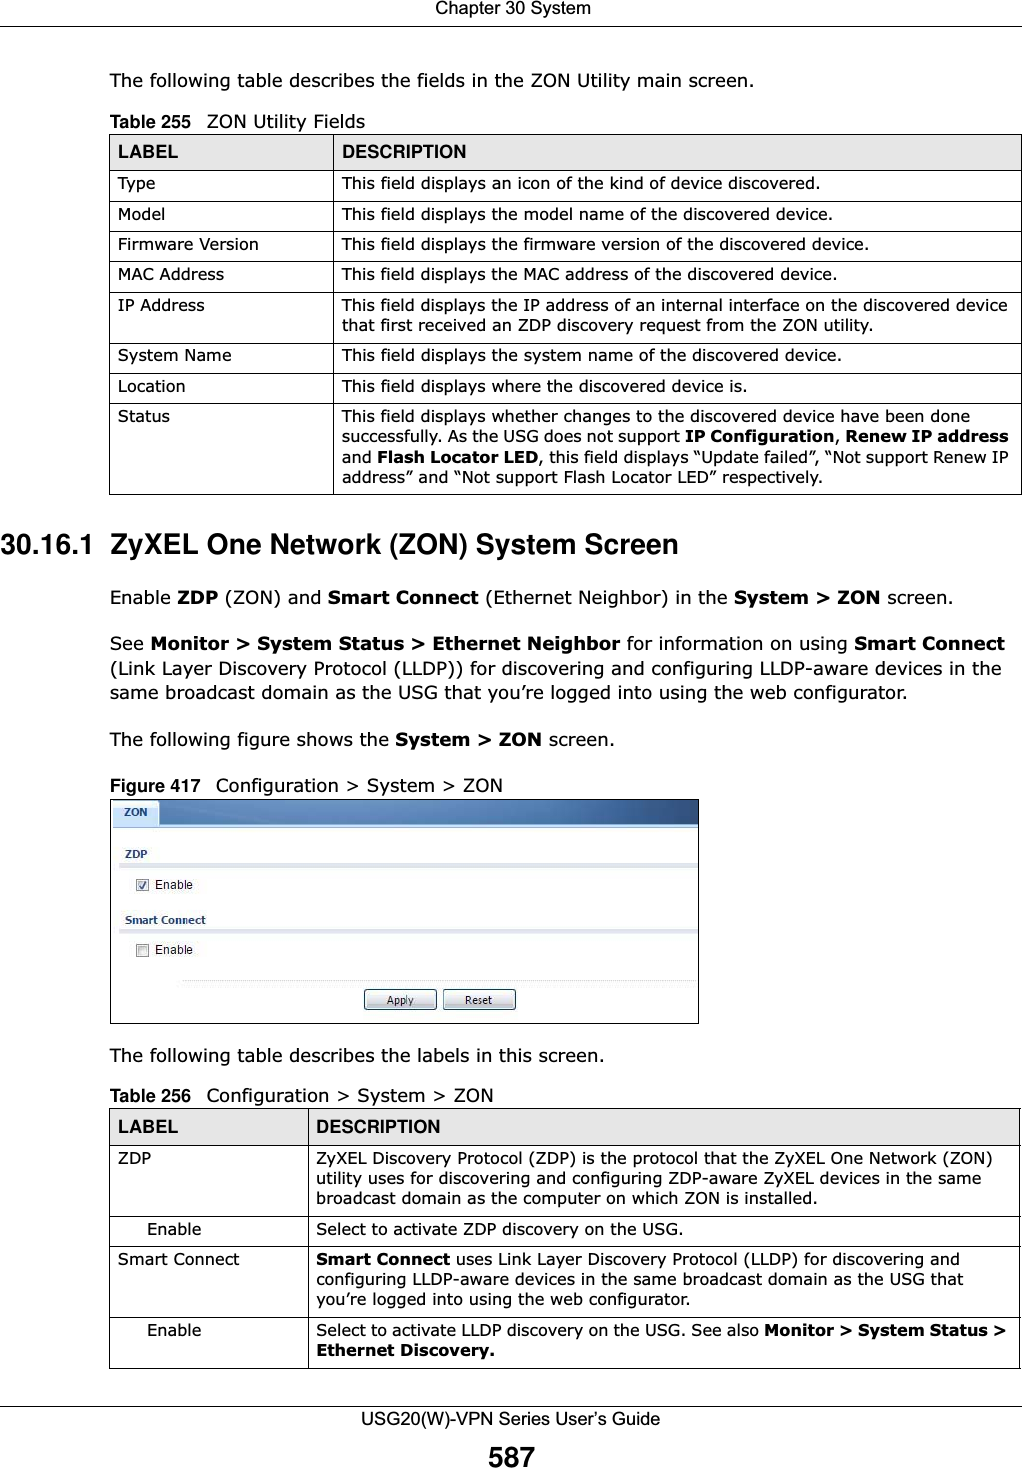  Chapter 30 SystemUSG20(W)-VPN Series User’s Guide587The following table describes the fields in the ZON Utility main screen.30.16.1  ZyXEL One Network (ZON) System ScreenEnable ZDP (ZON) and Smart Connect (Ethernet Neighbor) in the System &gt; ZON screen.See Monitor &gt; System Status &gt; Ethernet Neighbor for information on using Smart Connect (Link Layer Discovery Protocol (LLDP)) for discovering and configuring LLDP-aware devices in the same broadcast domain as the USG that you’re logged into using the web configurator. The following figure shows the System &gt; ZON screen.Figure 417   Configuration &gt; System &gt; ZONThe following table describes the labels in this screen. Table 255   ZON Utility FieldsLABEL DESCRIPTIONType This field displays an icon of the kind of device discovered. Model This field displays the model name of the discovered device.Firmware Version This field displays the firmware version of the discovered device.MAC Address This field displays the MAC address of the discovered device.IP Address This field displays the IP address of an internal interface on the discovered device that first received an ZDP discovery request from the ZON utility.System Name This field displays the system name of the discovered device.Location This field displays where the discovered device is.Status This field displays whether changes to the discovered device have been done successfully. As the USG does not support IP Configuration, Renew IP address and Flash Locator LED, this field displays “Update failed”, “Not support Renew IP address” and “Not support Flash Locator LED” respectively.Table 256   Configuration &gt; System &gt; ZONLABEL DESCRIPTIONZDP ZyXEL Discovery Protocol (ZDP) is the protocol that the ZyXEL One Network (ZON) utility uses for discovering and configuring ZDP-aware ZyXEL devices in the same broadcast domain as the computer on which ZON is installed.Enable Select to activate ZDP discovery on the USG.Smart Connect Smart Connect uses Link Layer Discovery Protocol (LLDP) for discovering and configuring LLDP-aware devices in the same broadcast domain as the USG that you’re logged into using the web configurator. Enable Select to activate LLDP discovery on the USG. See also Monitor &gt; System Status &gt; Ethernet Discovery.